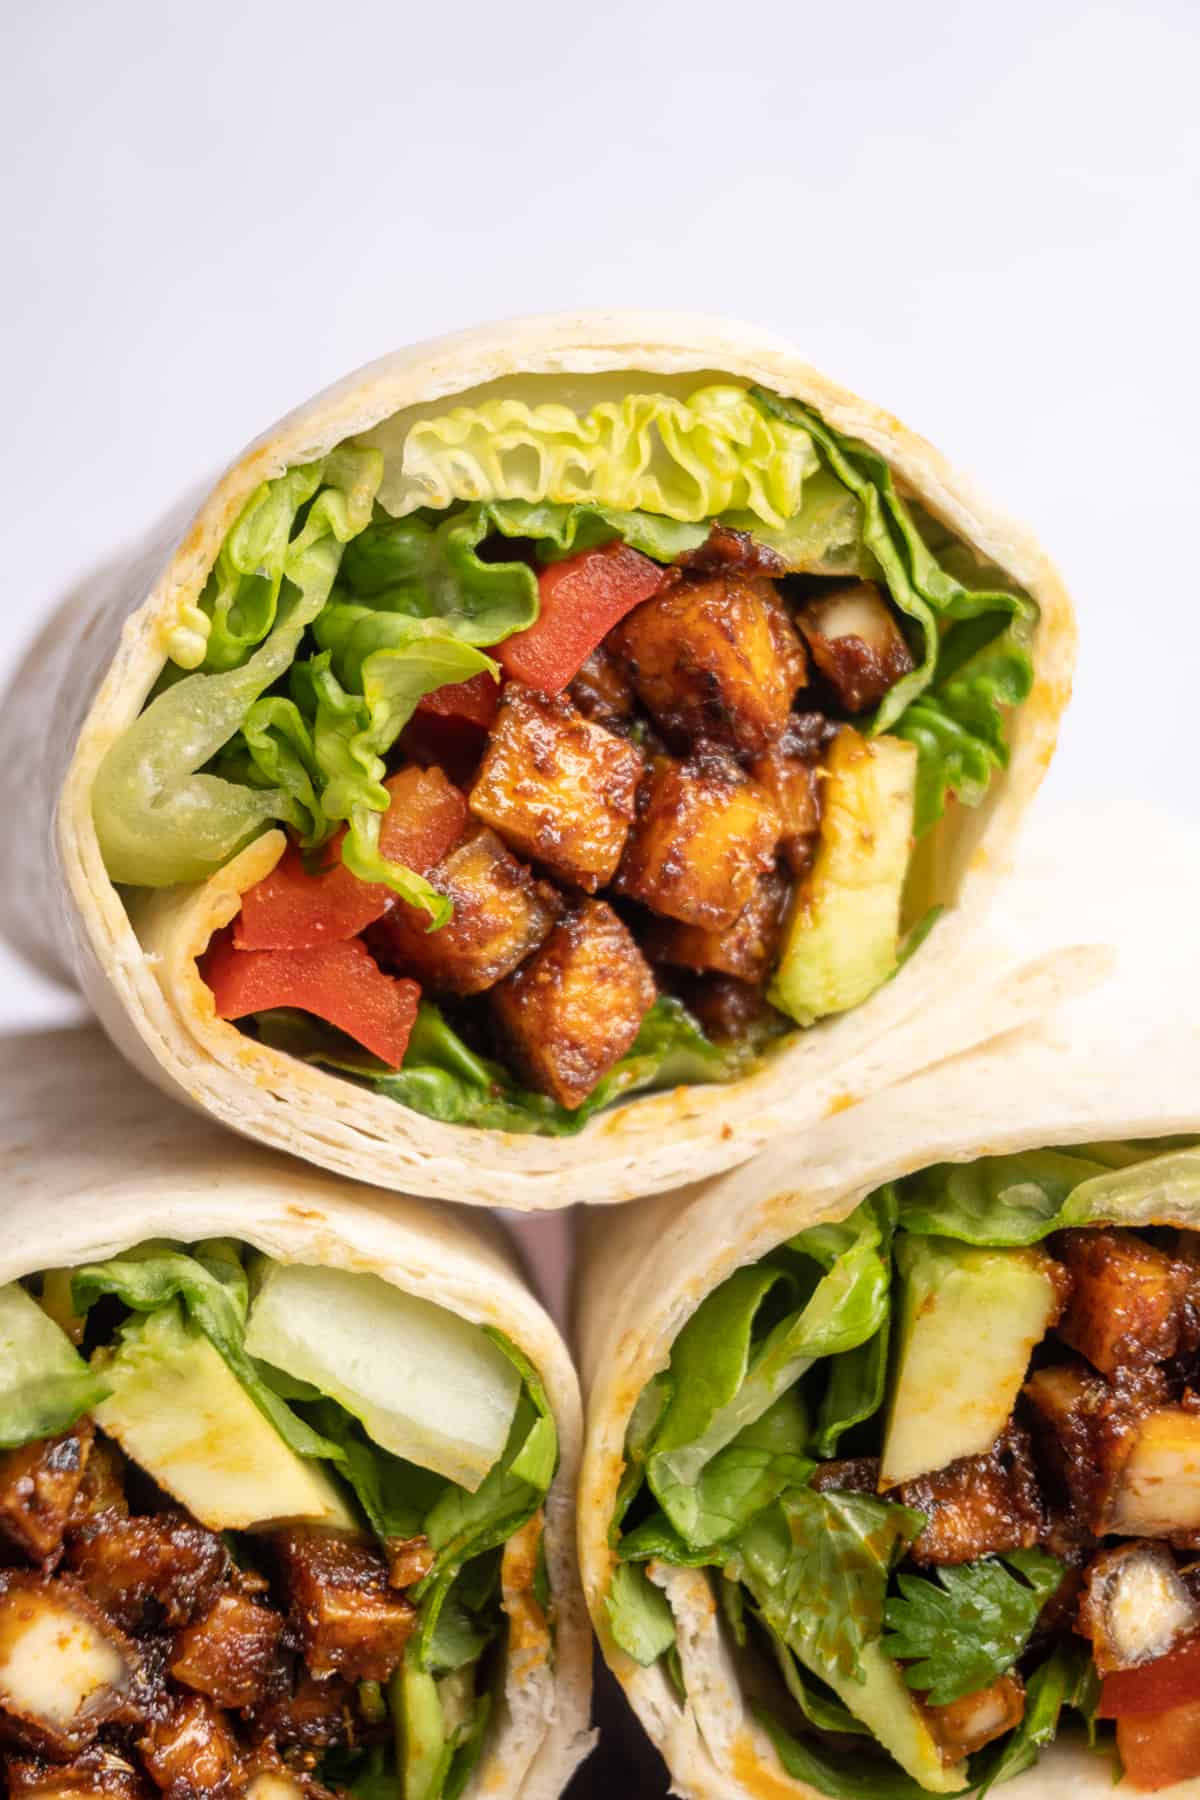 Tortilla wraps sliced in half, showing the filling of vegetables and spicy coated tofu cubes.